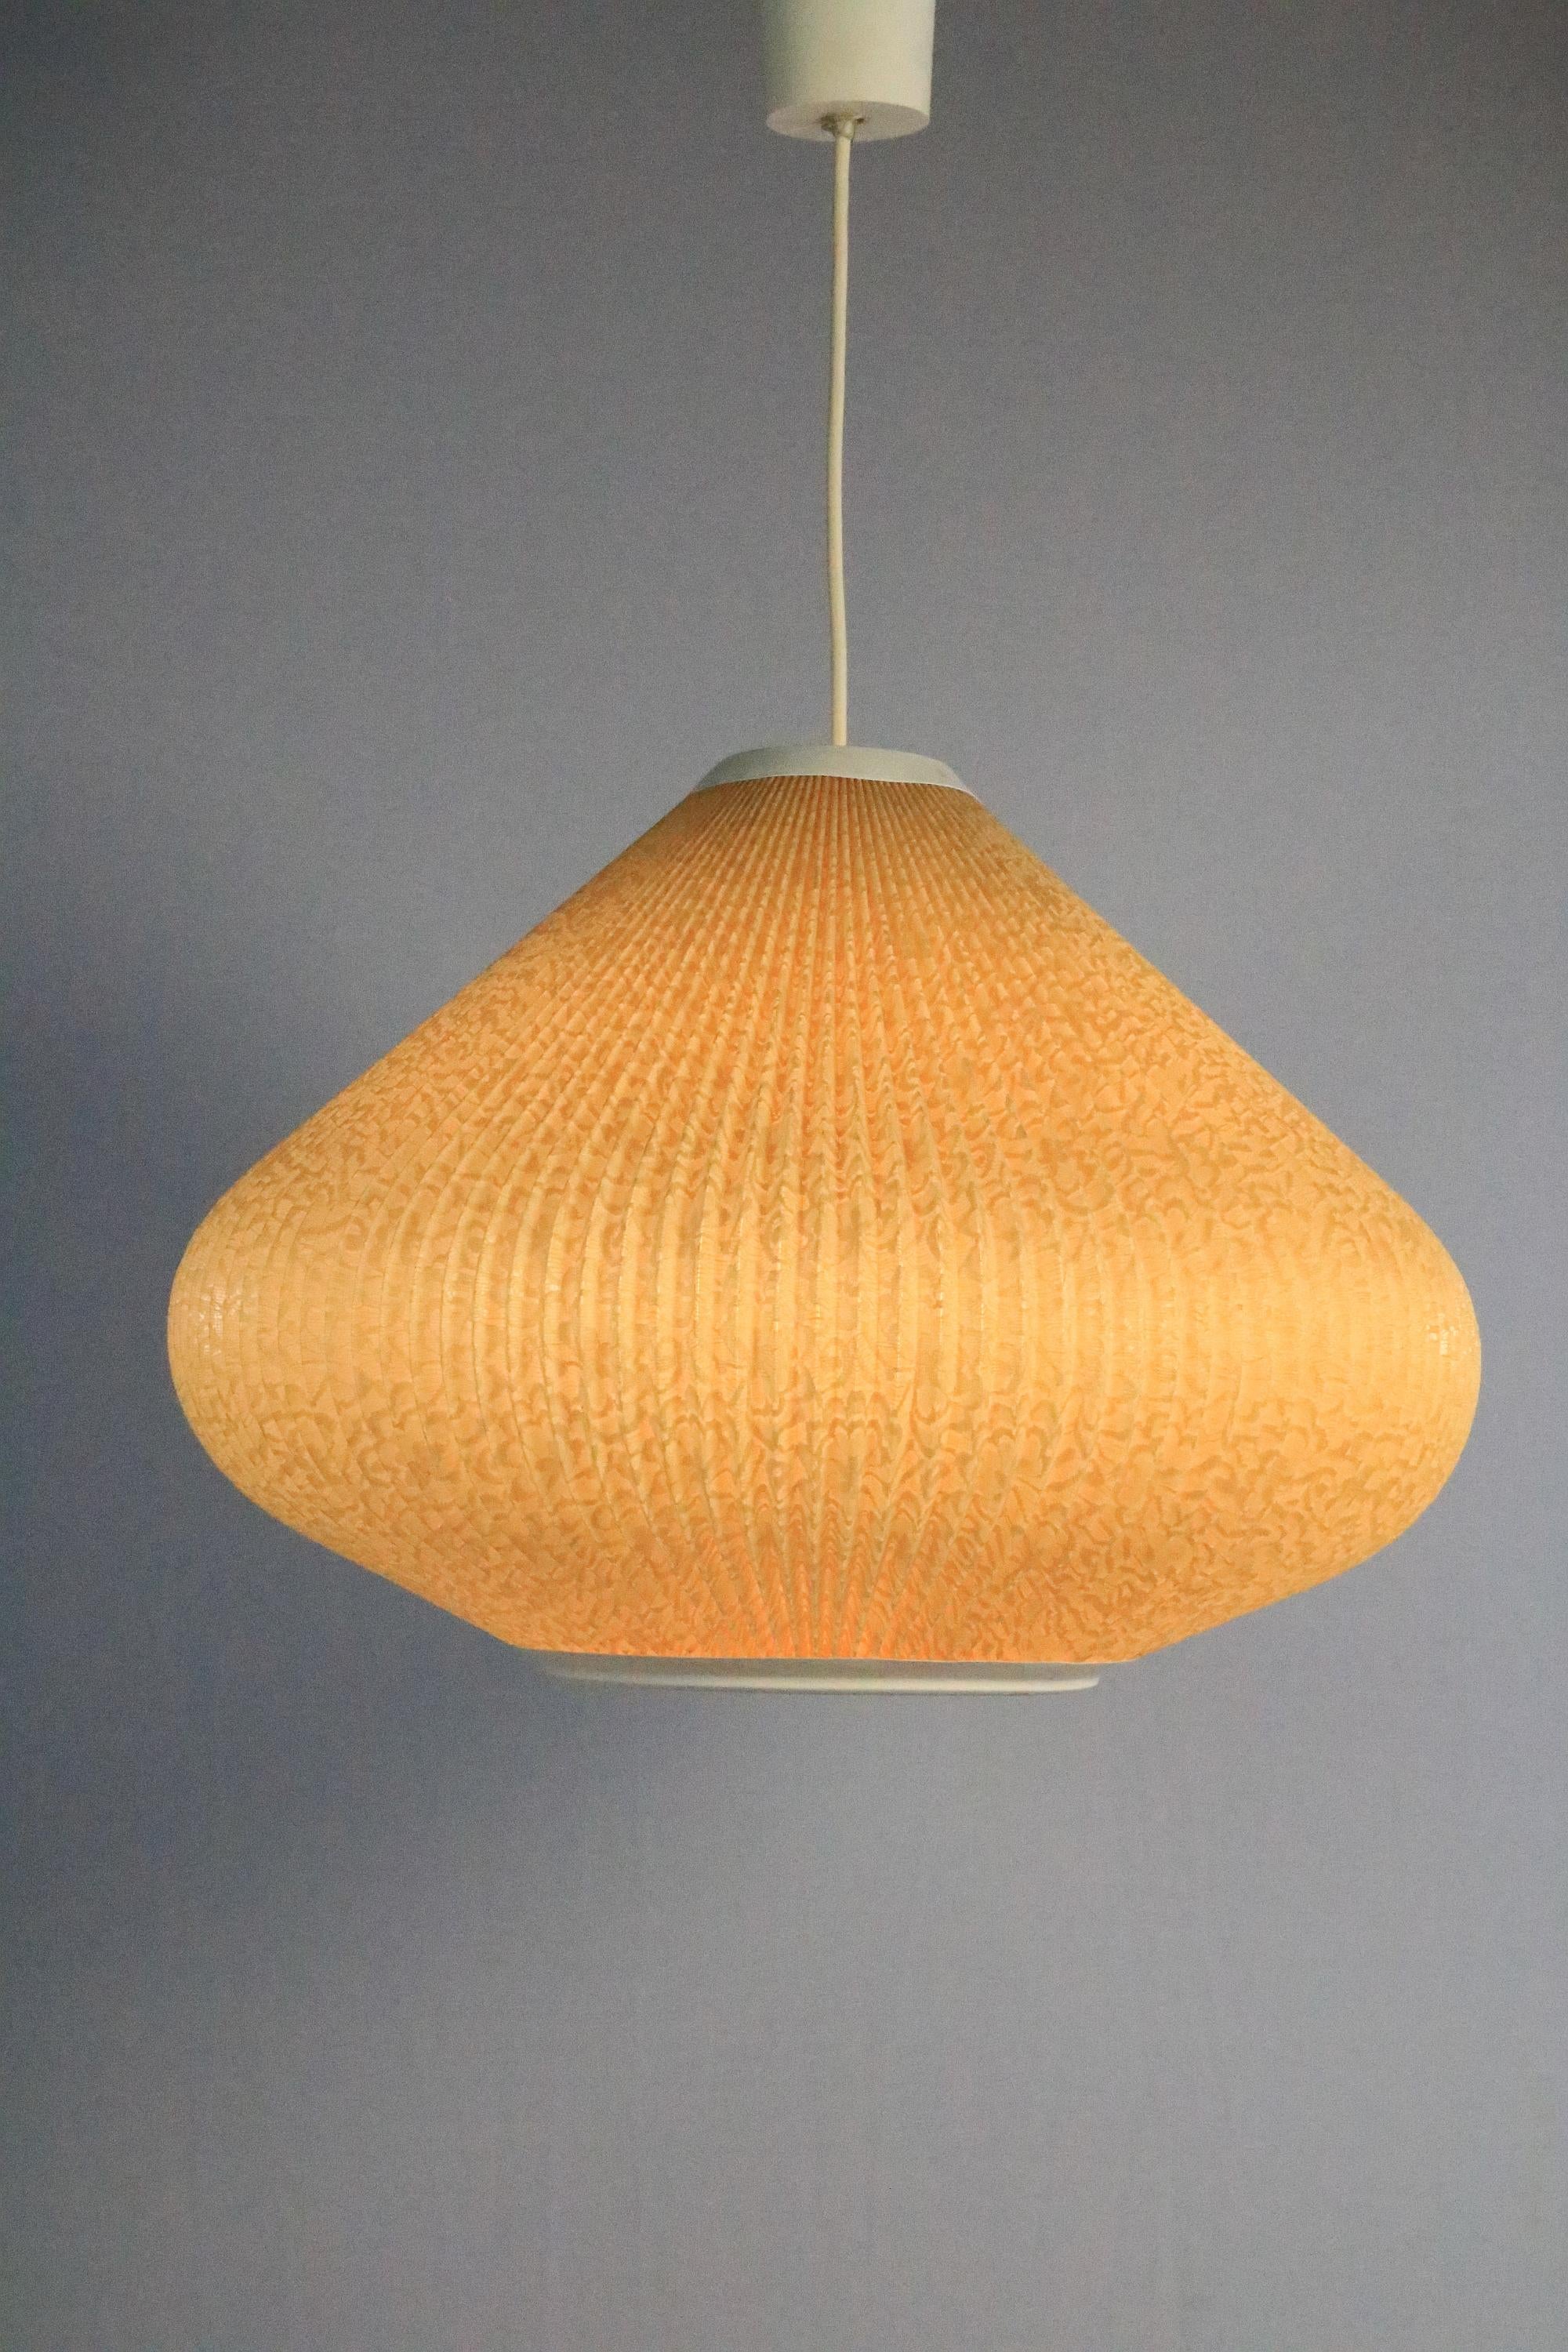 A typical lamp of the 1960s. Was made in that type much in Denmark.
 
Origin: GDR
 
Beautiful lighting effect when the light is turned on. This especially shows off the lace pattern.
 
Material: hard plastic
Very well preserved.
 
New cable, cable